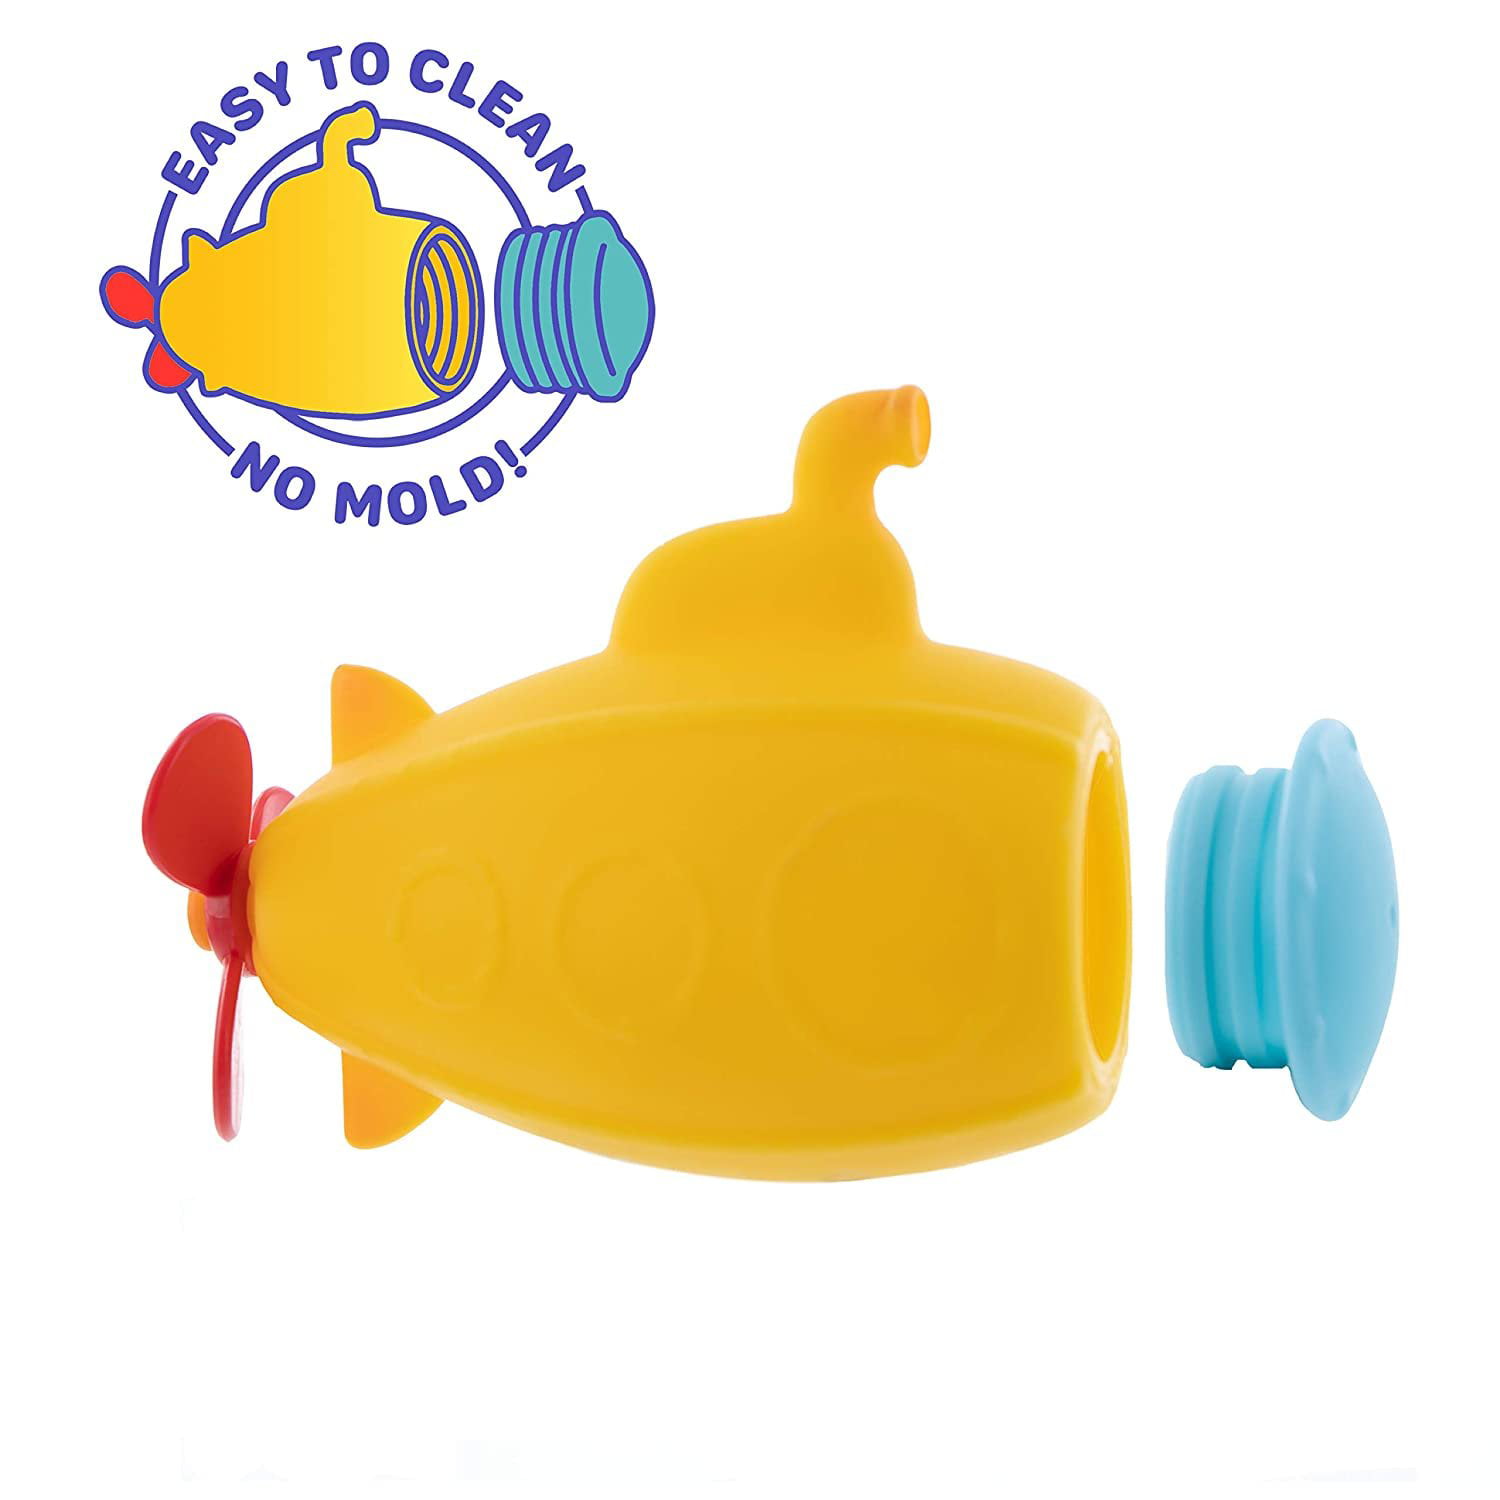 Package of 2 Mold Free Bath & Beach Toy Submarine by Marcus & Marcus 